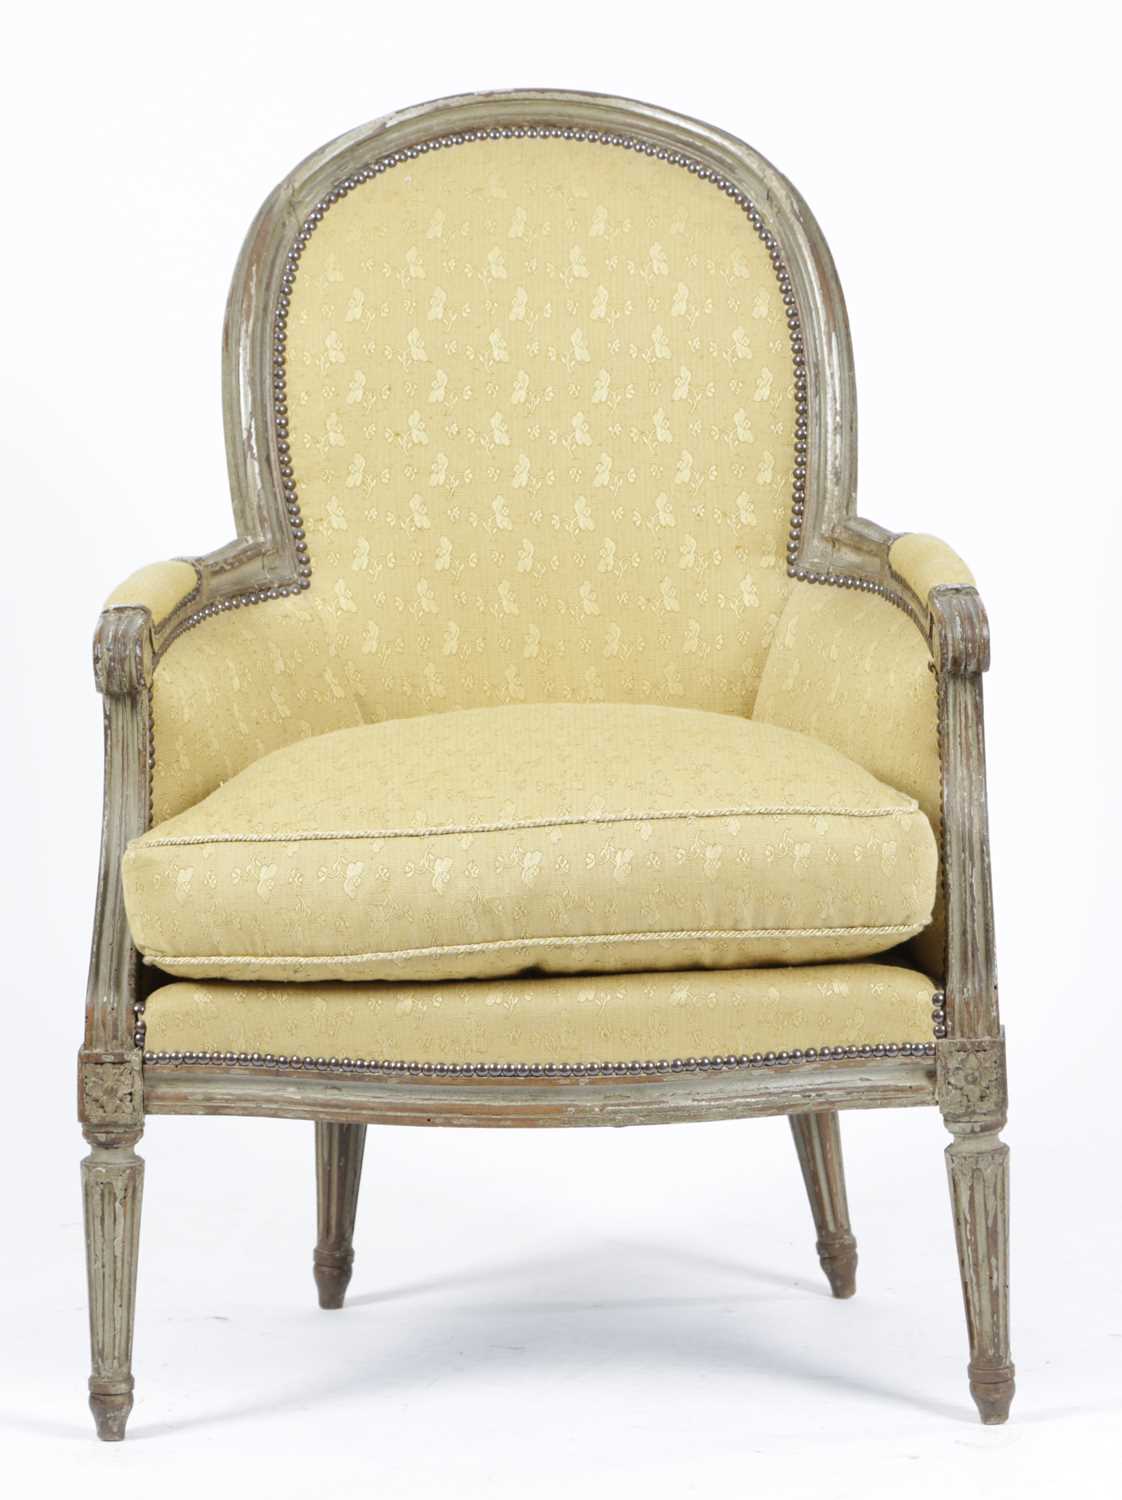 A FRENCH PAINTED BERGÈRE IN LOUIS XVI STYLE, 19TH CENTURY with an arched back and a moulded frame - Image 2 of 2